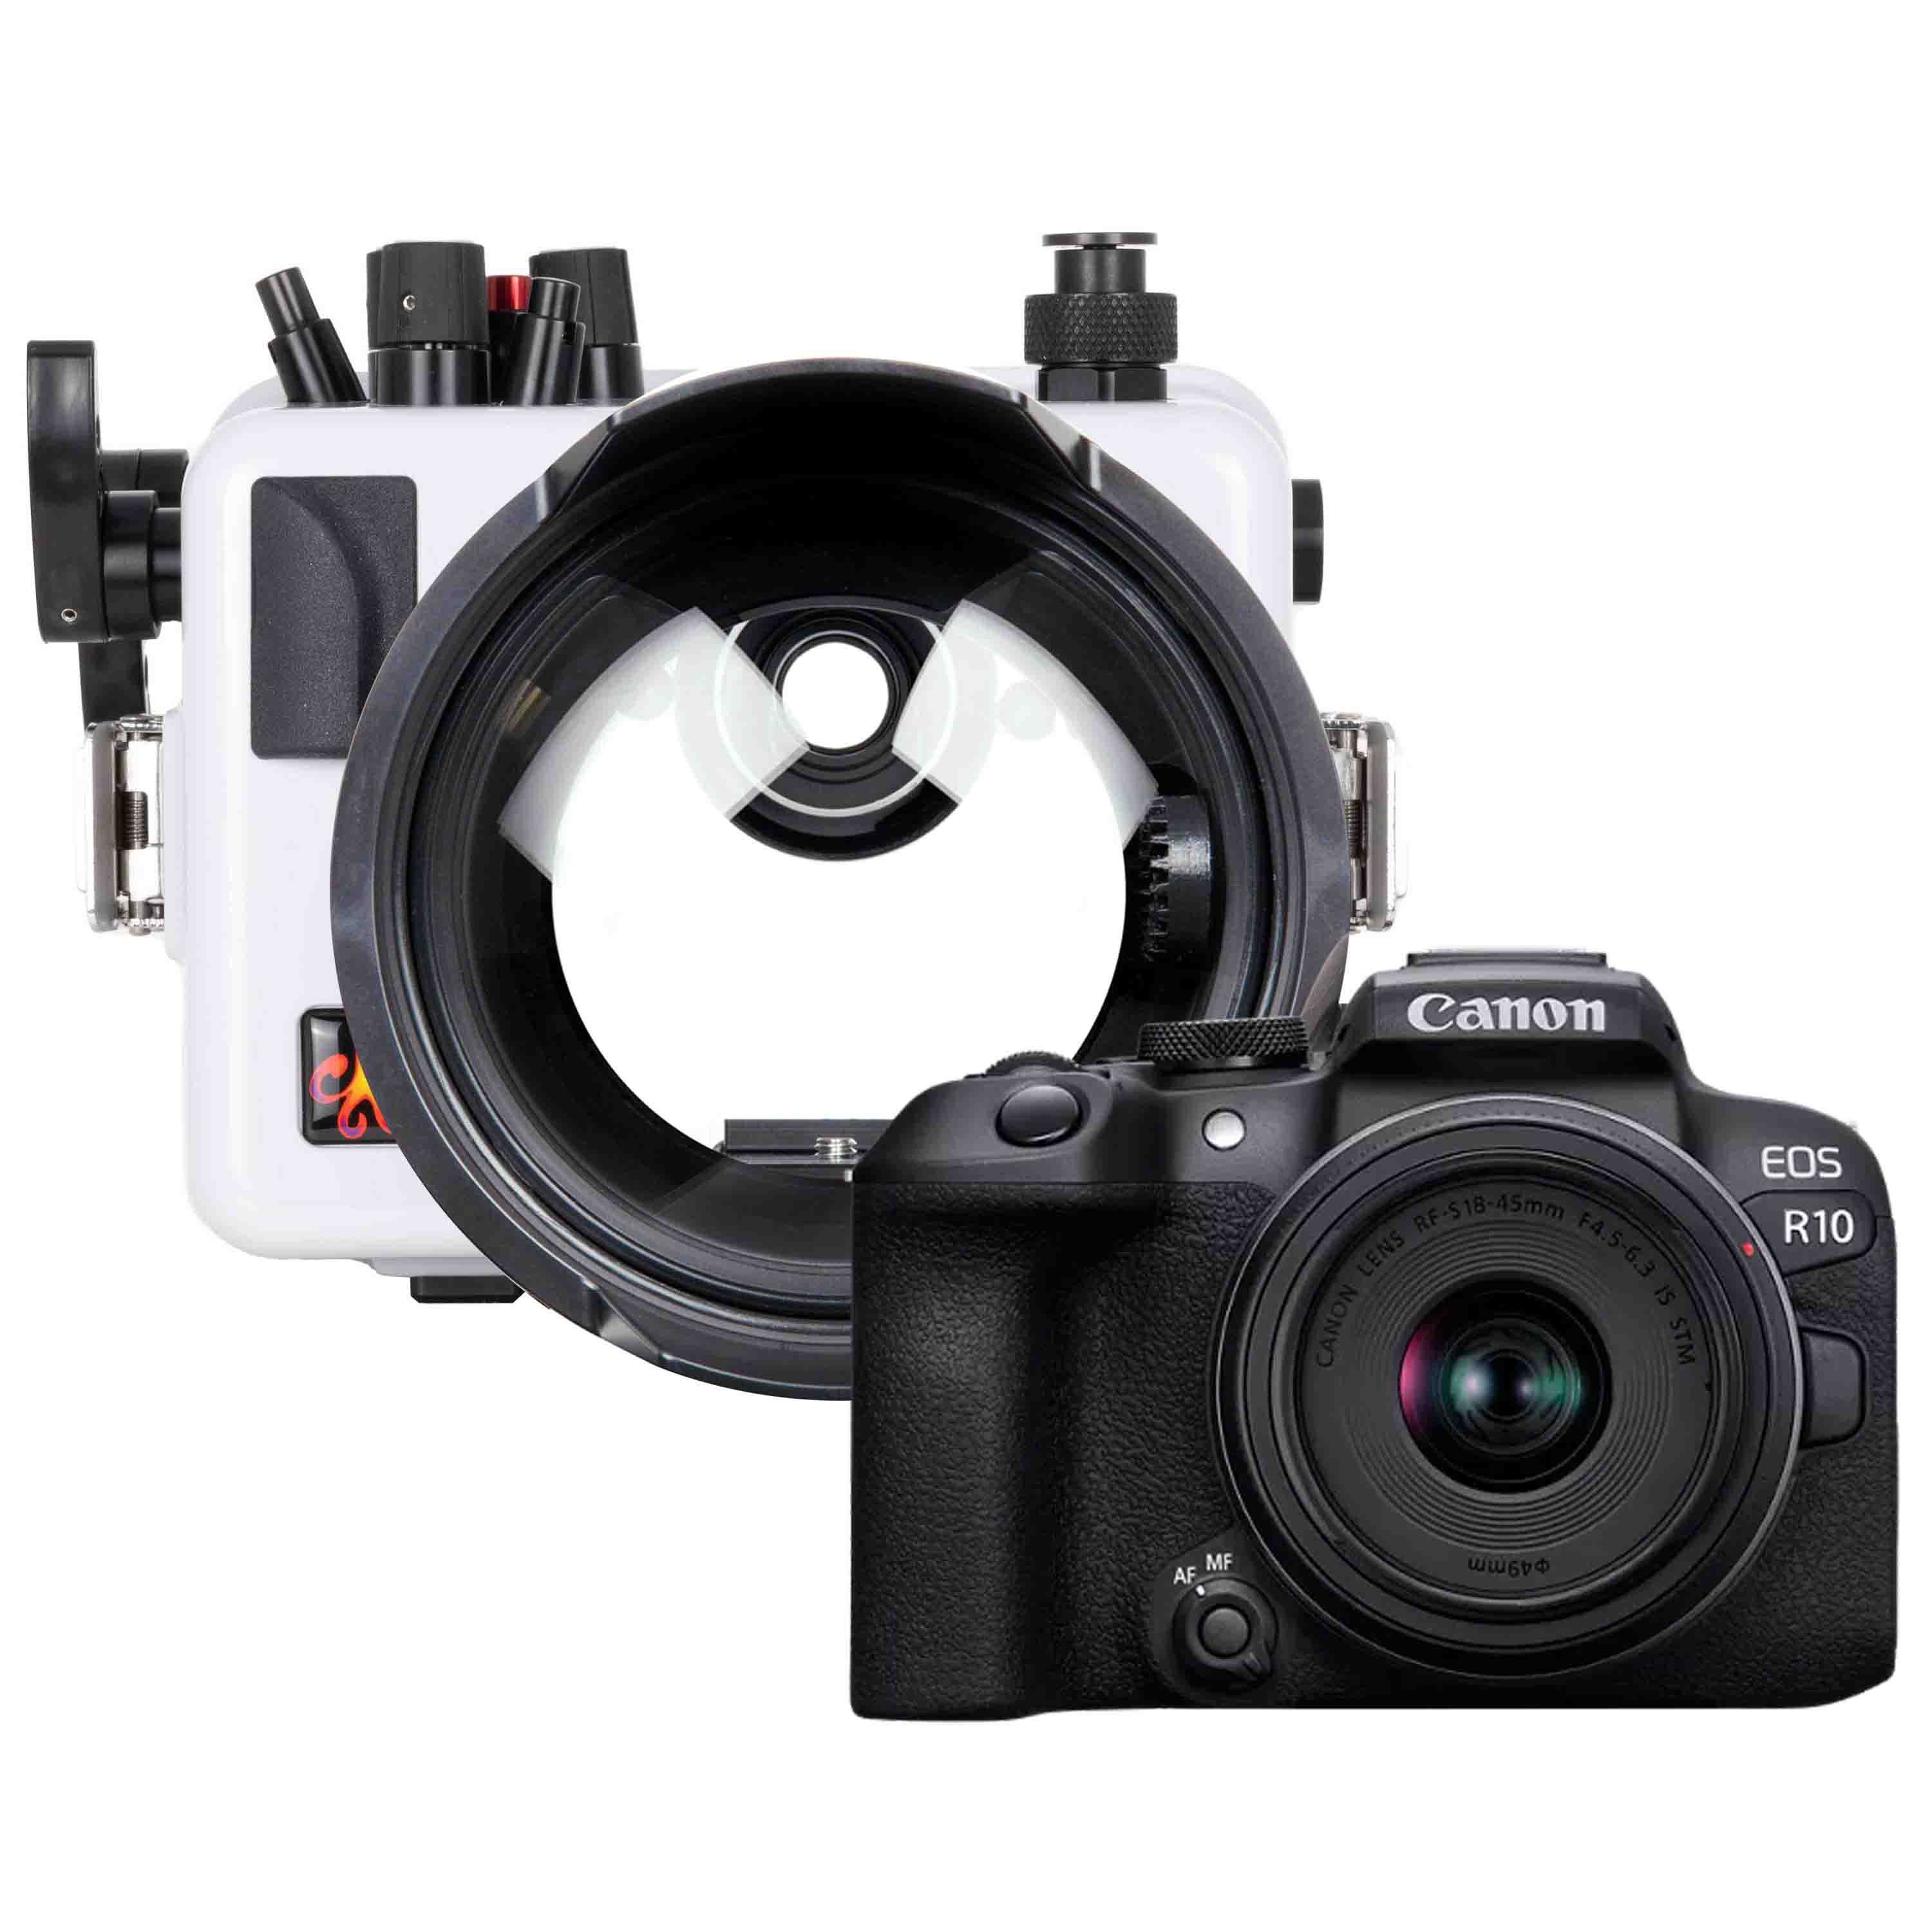 200DLM/D Underwater Housing and Canon EOS R10 Camera Complete Kit